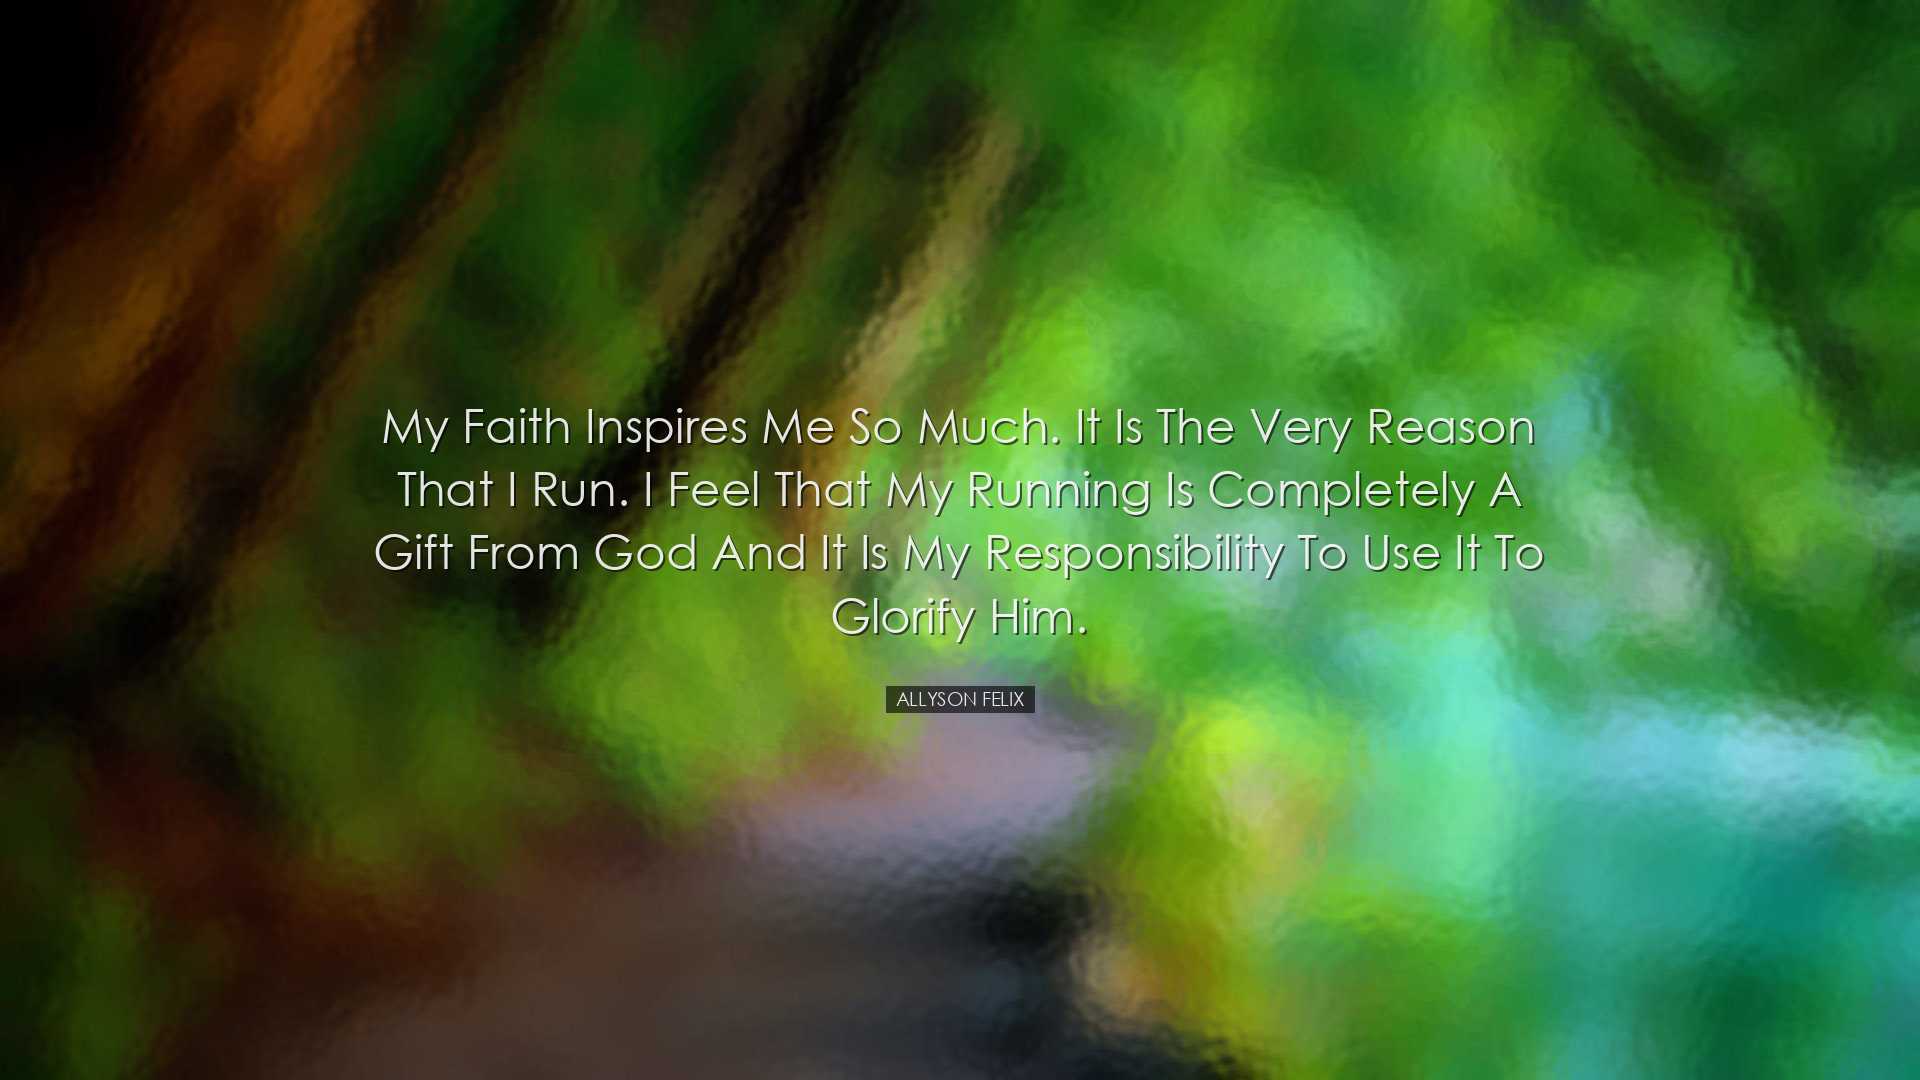 My faith inspires me so much. It is the very reason that I run. I